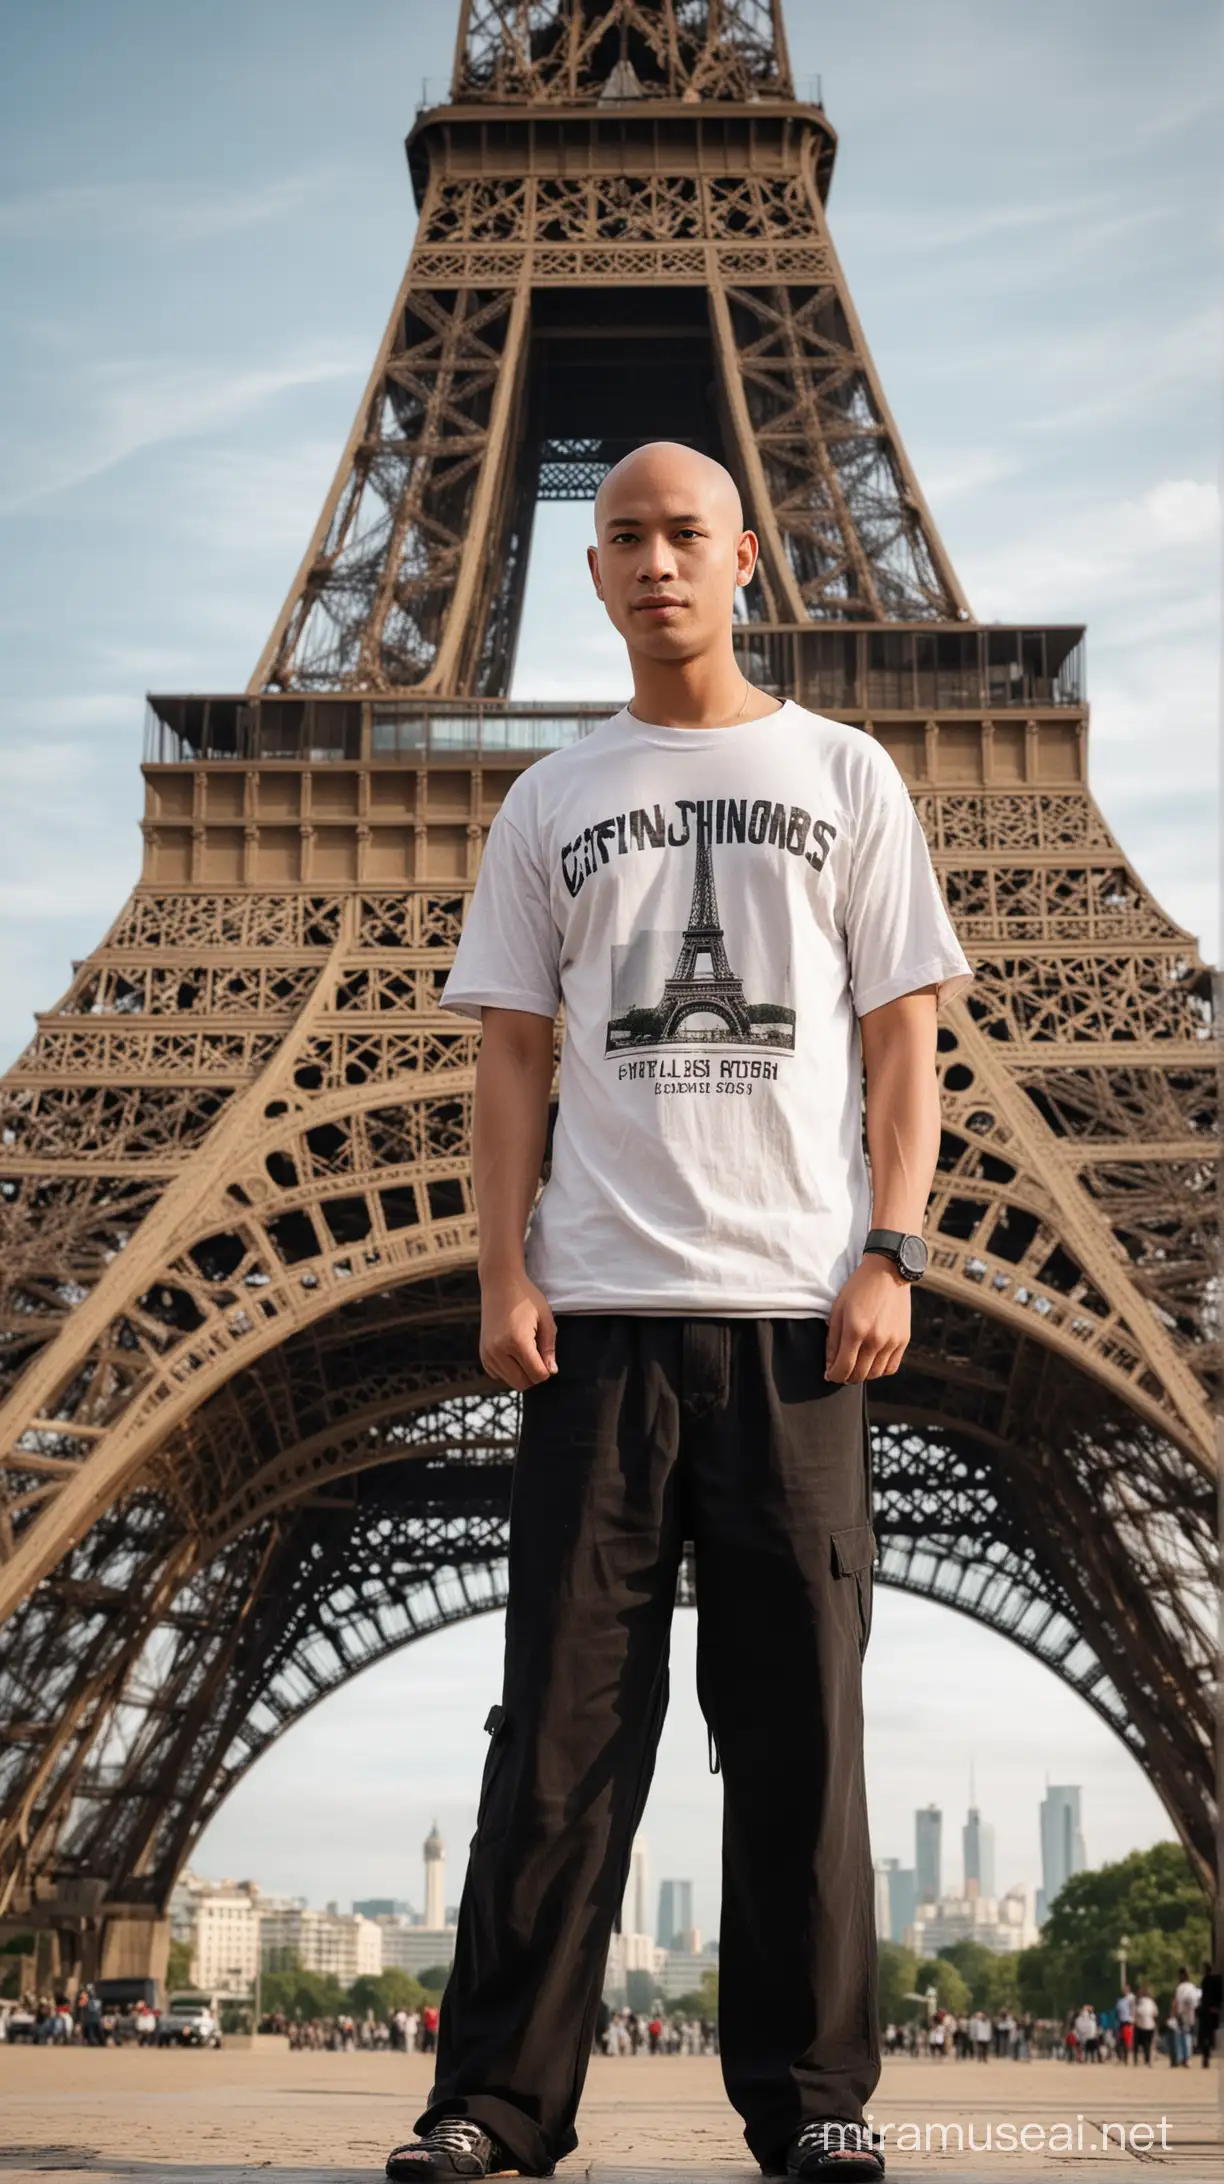 Bald Indonesian Man Poses Under Eiffel Tower with Canon DSLR Camera